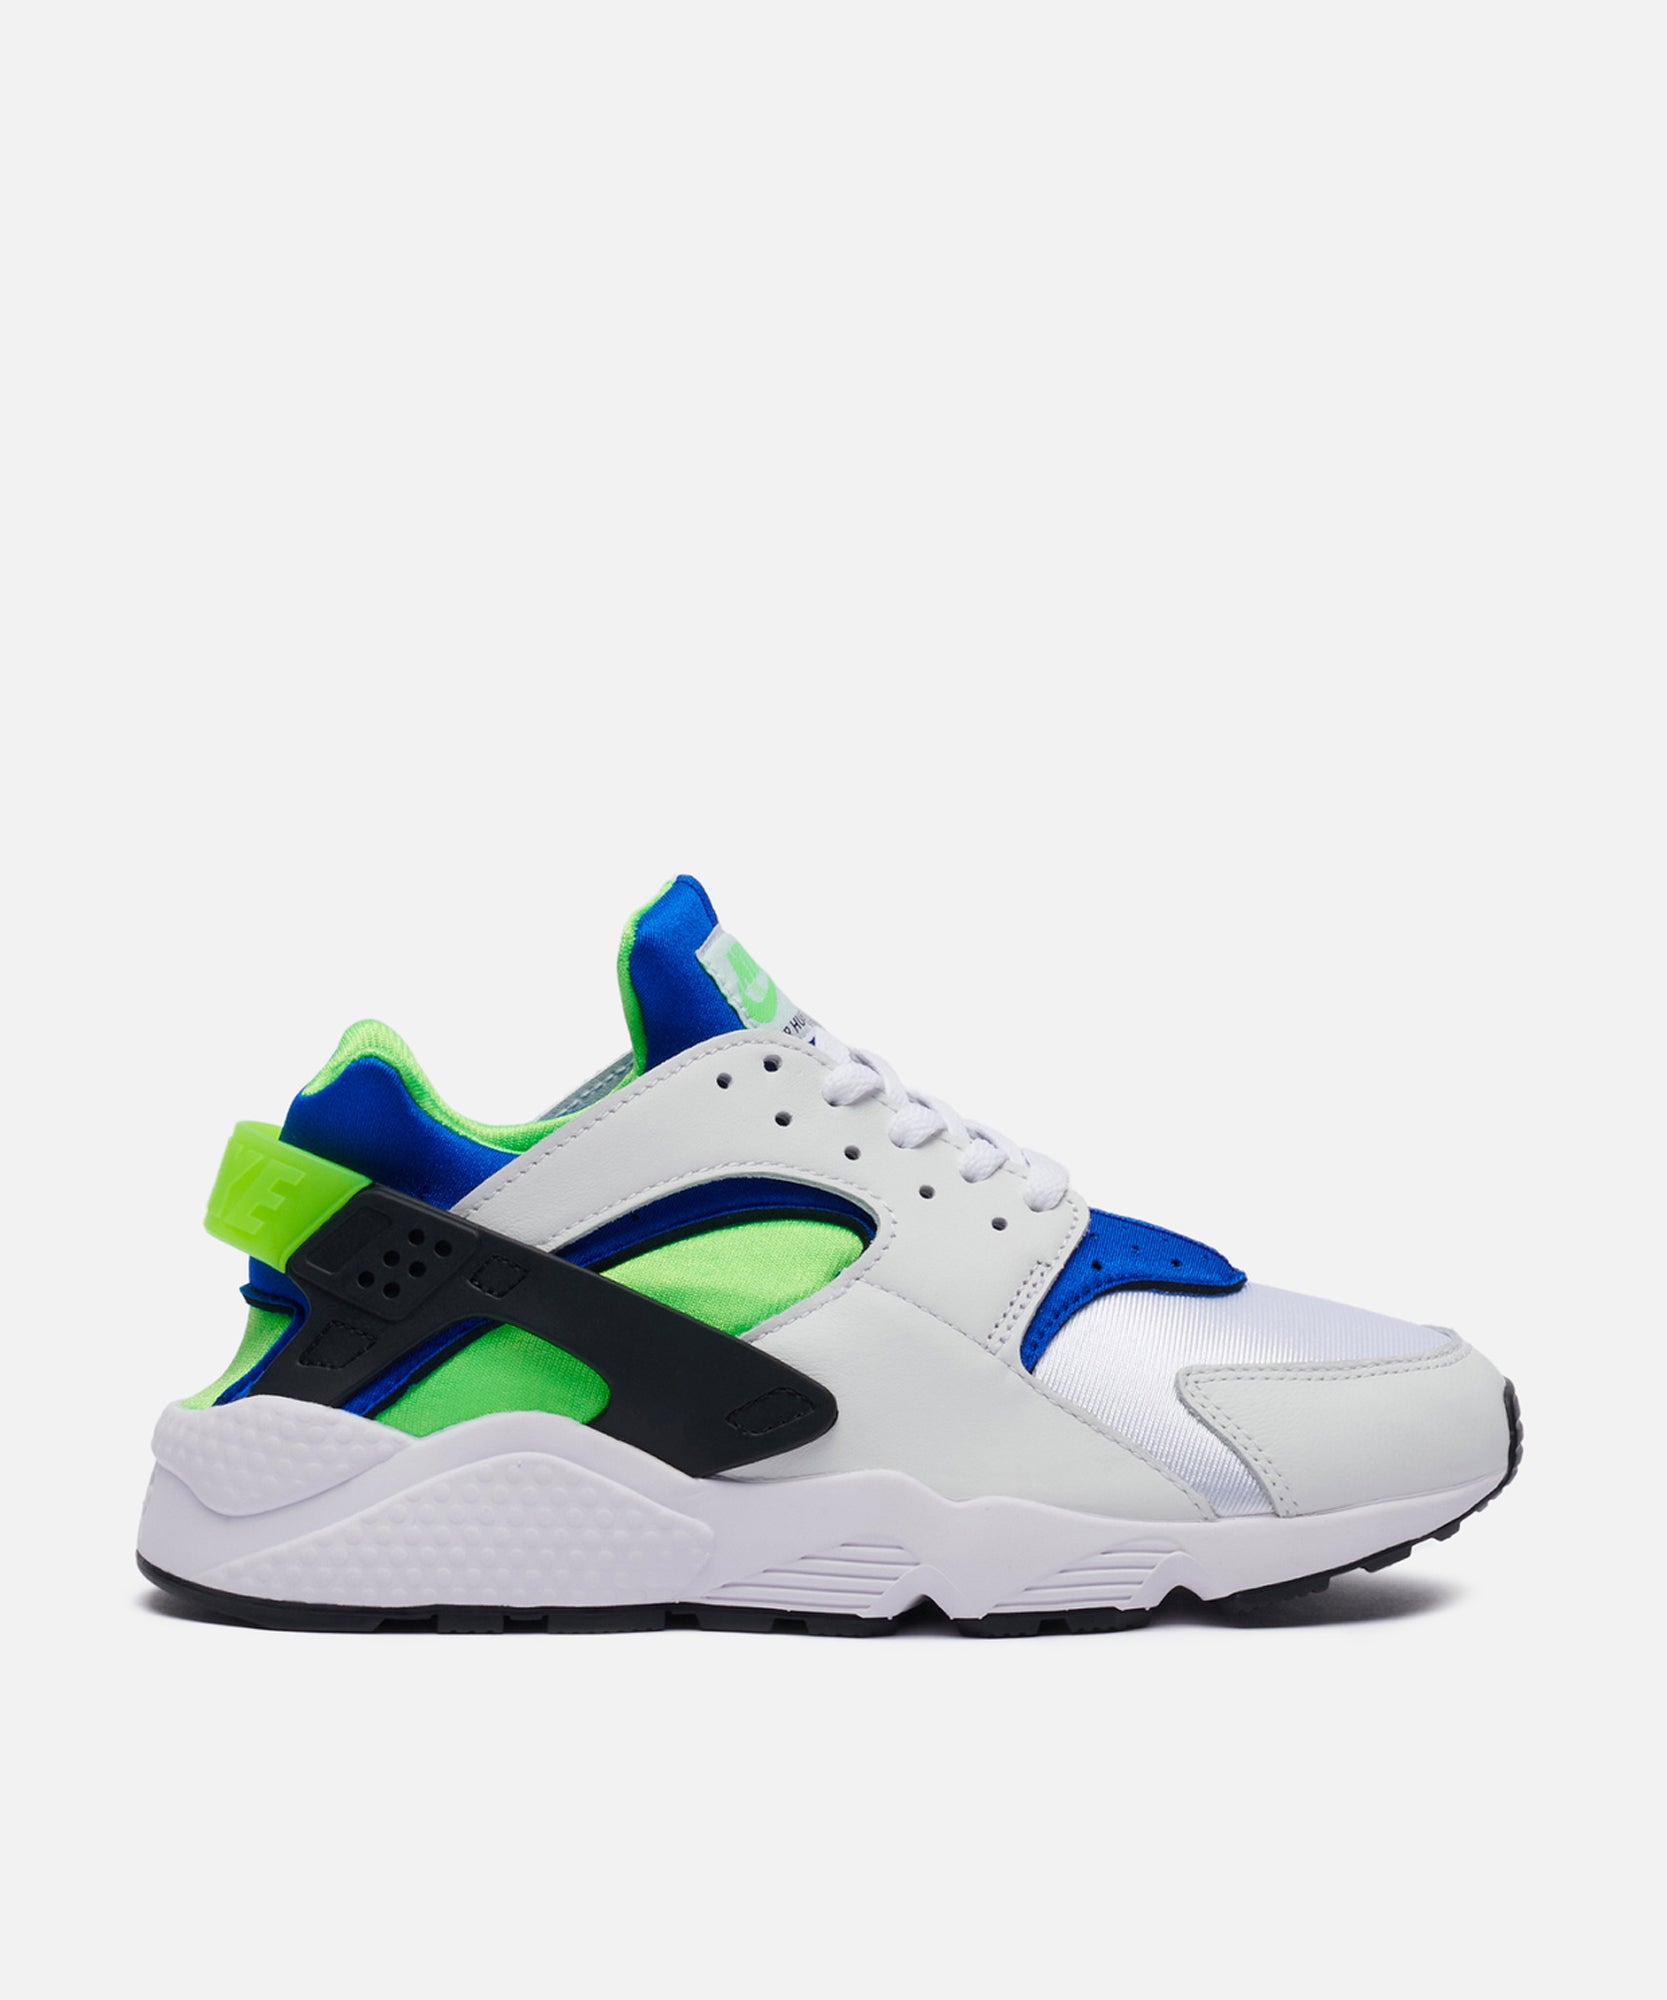 huaraches blue and green